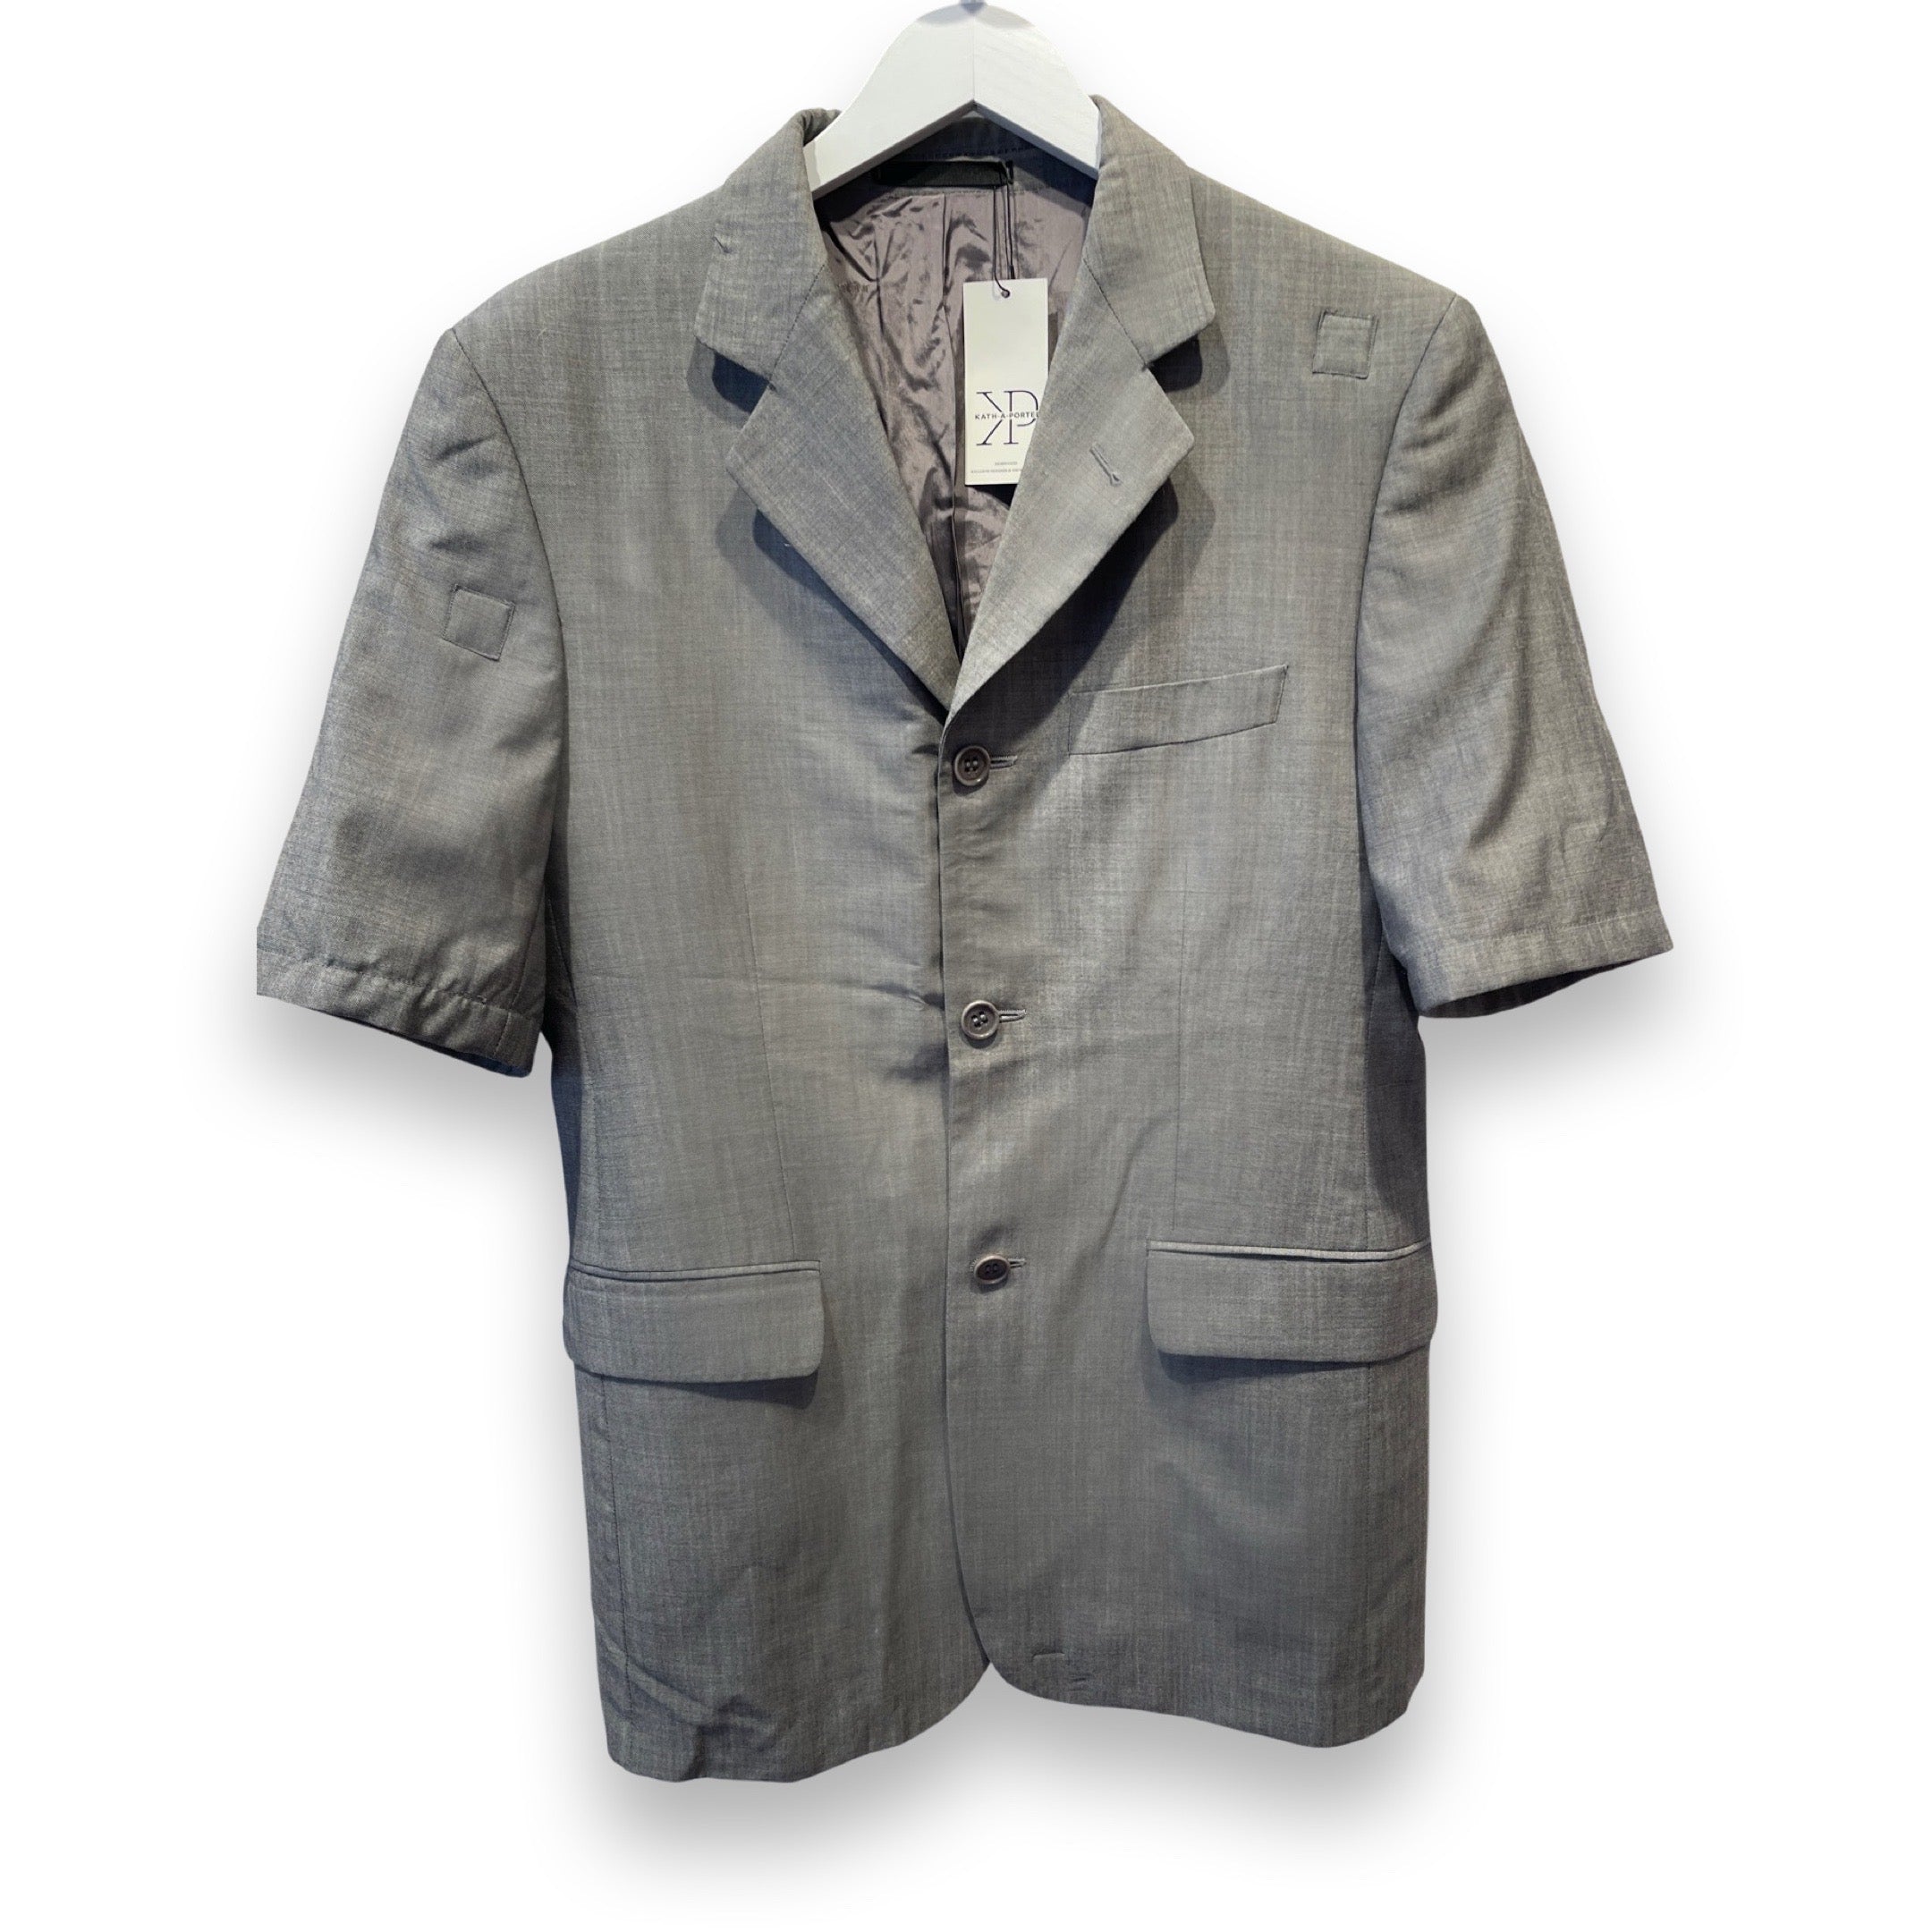 Light grey short sleeve summer suit by YSL.